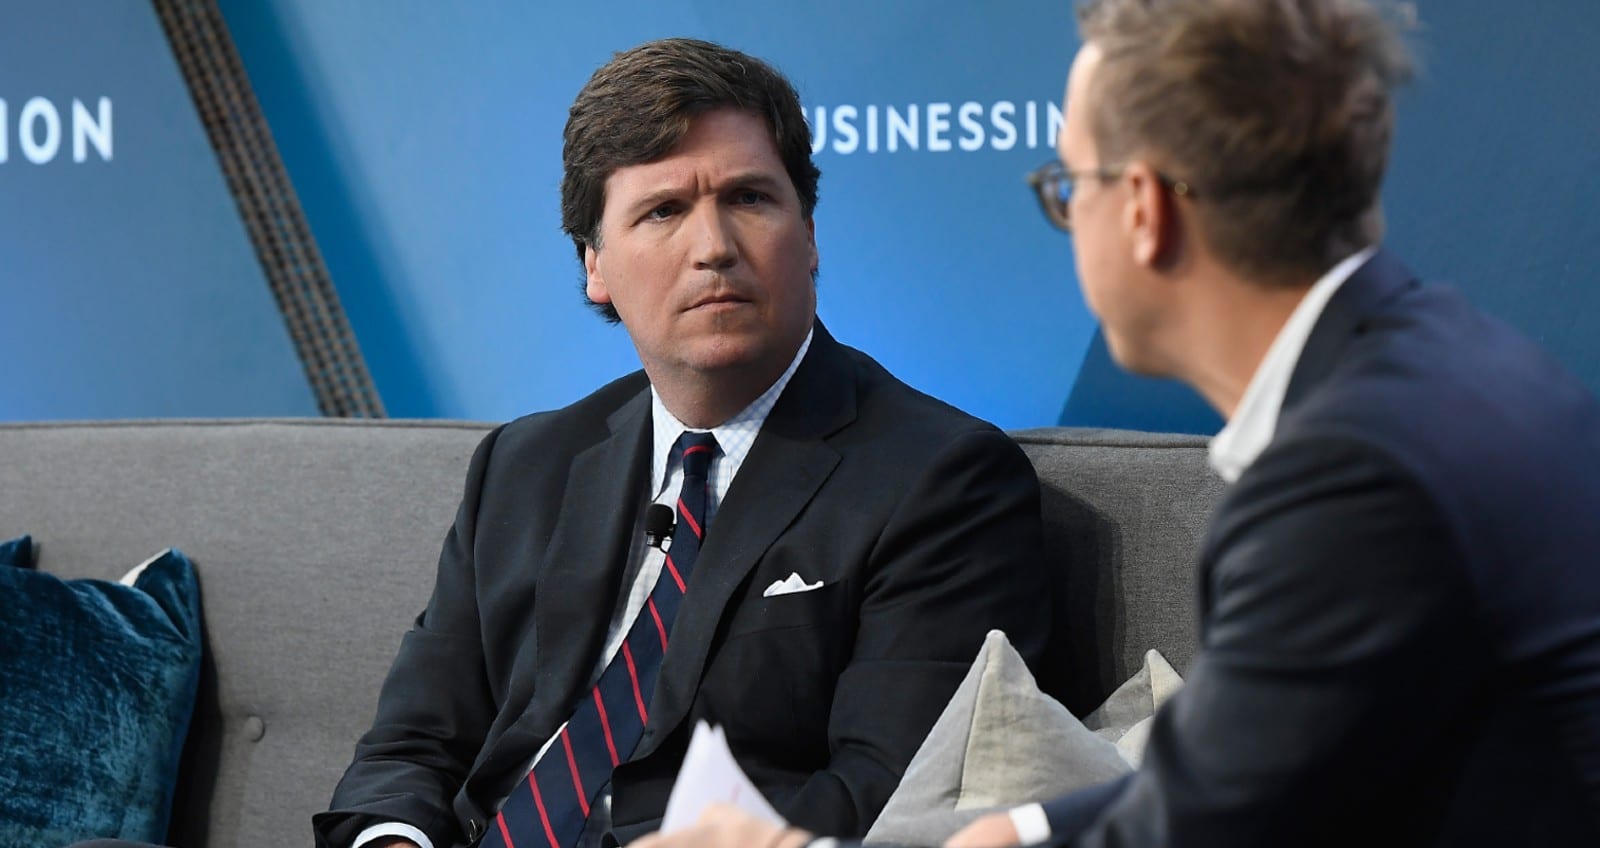 Insiders Reveal Who at Fox News Was Behind the Stunning Tucker Carlson Firing - 'This Was a Backstabbing'